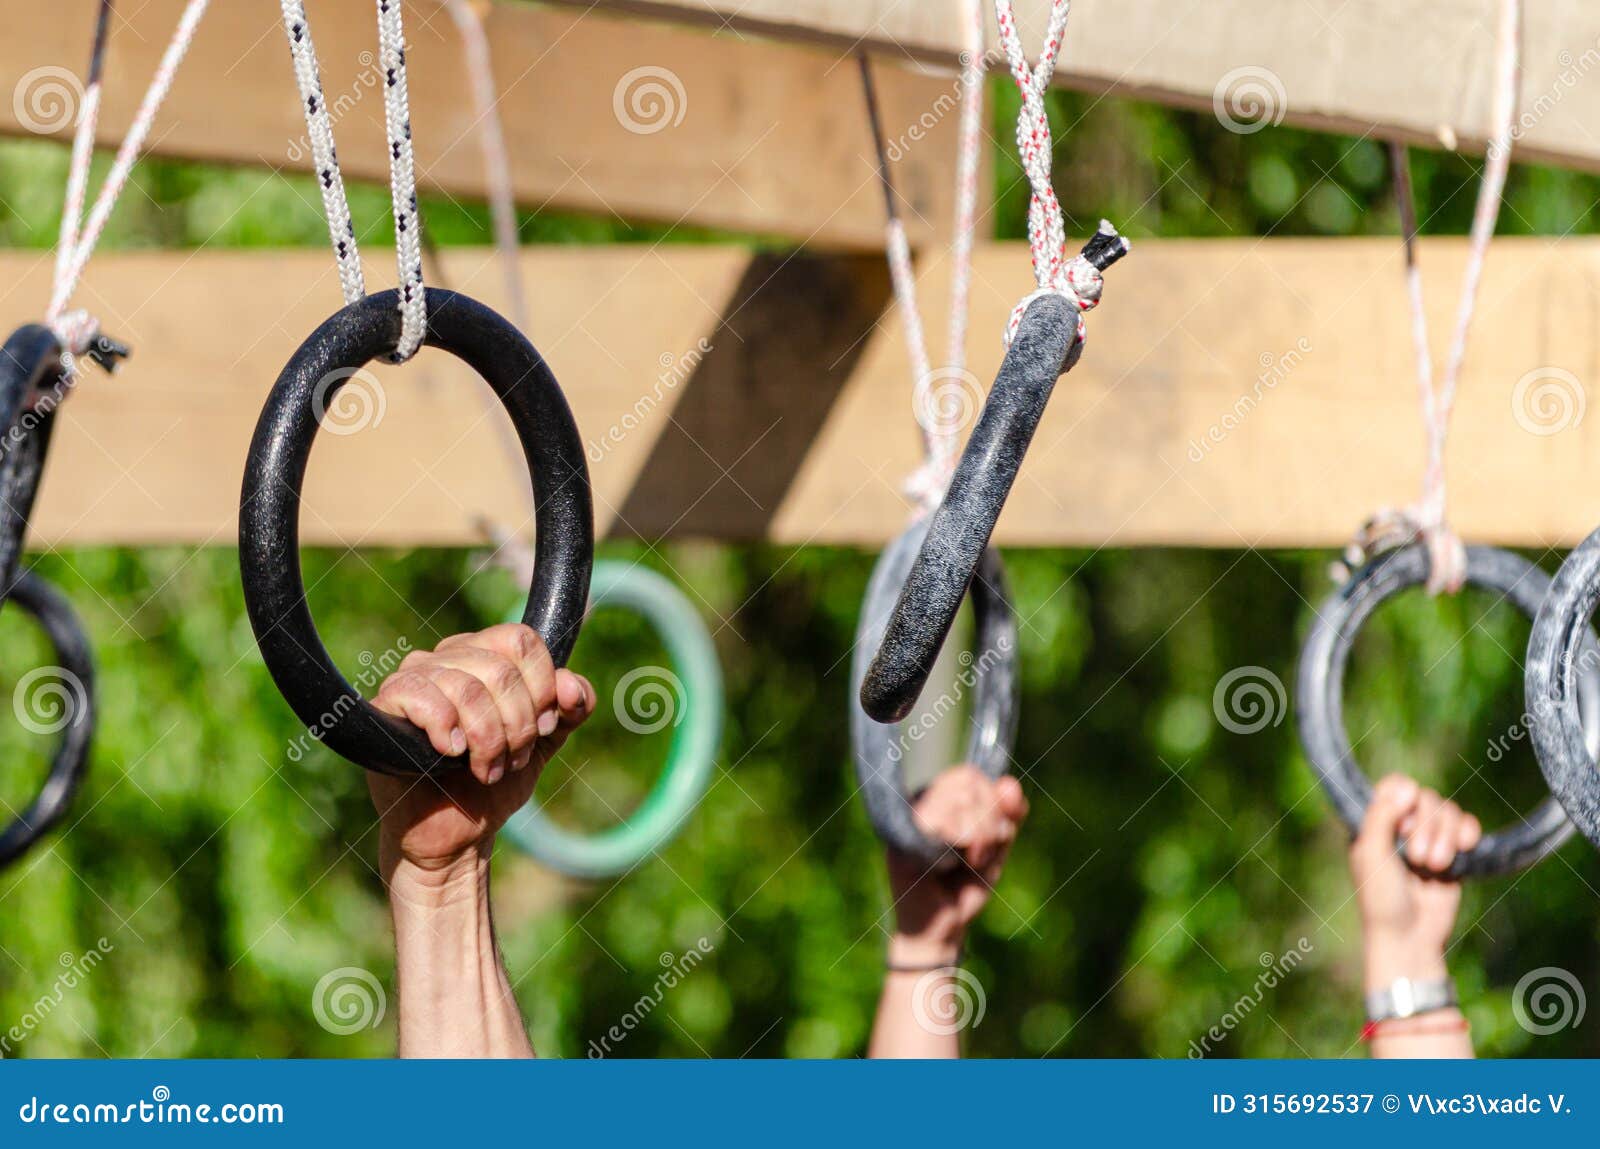 selective focus, athletes hands at a hanging obstacle at an obstacle course race, ocr